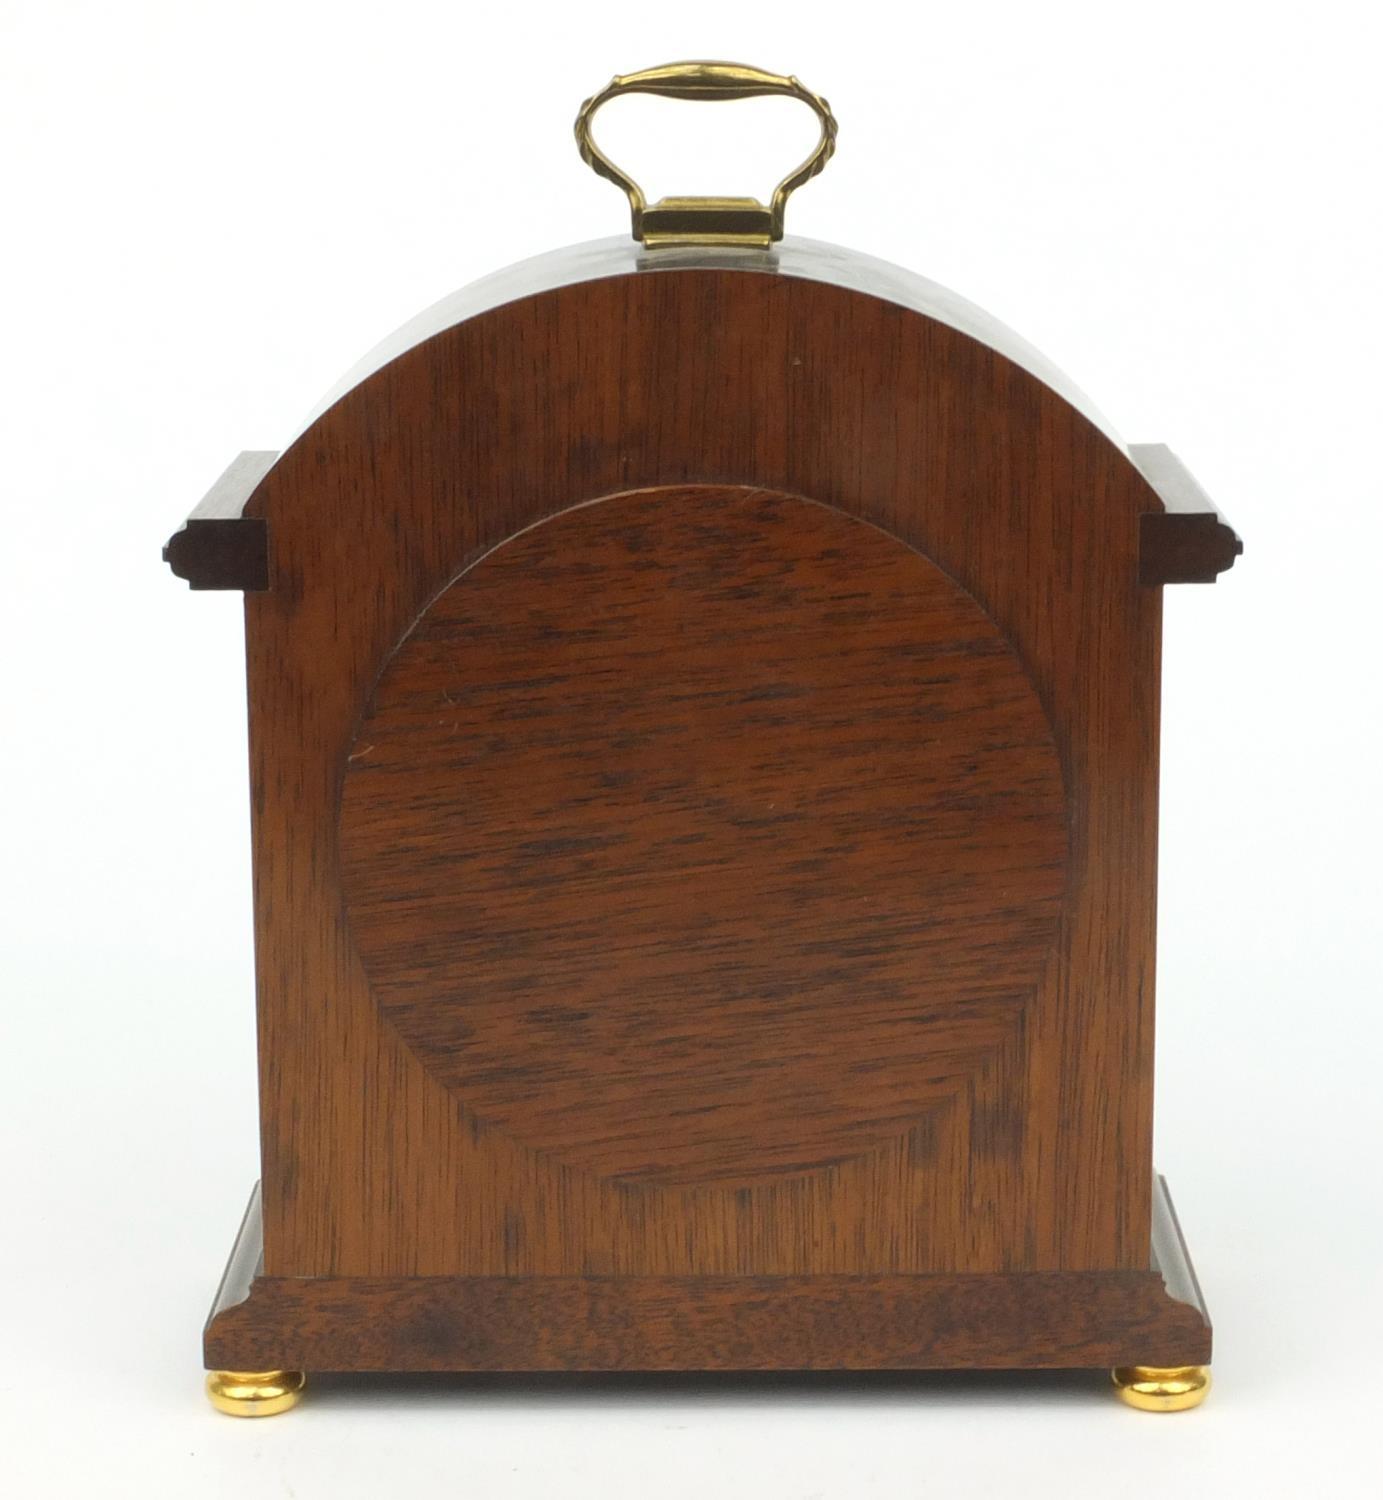 Inlaid mahogany Comitti of London mantel clock, with brass handle, 25cm high including the handle - Image 2 of 7